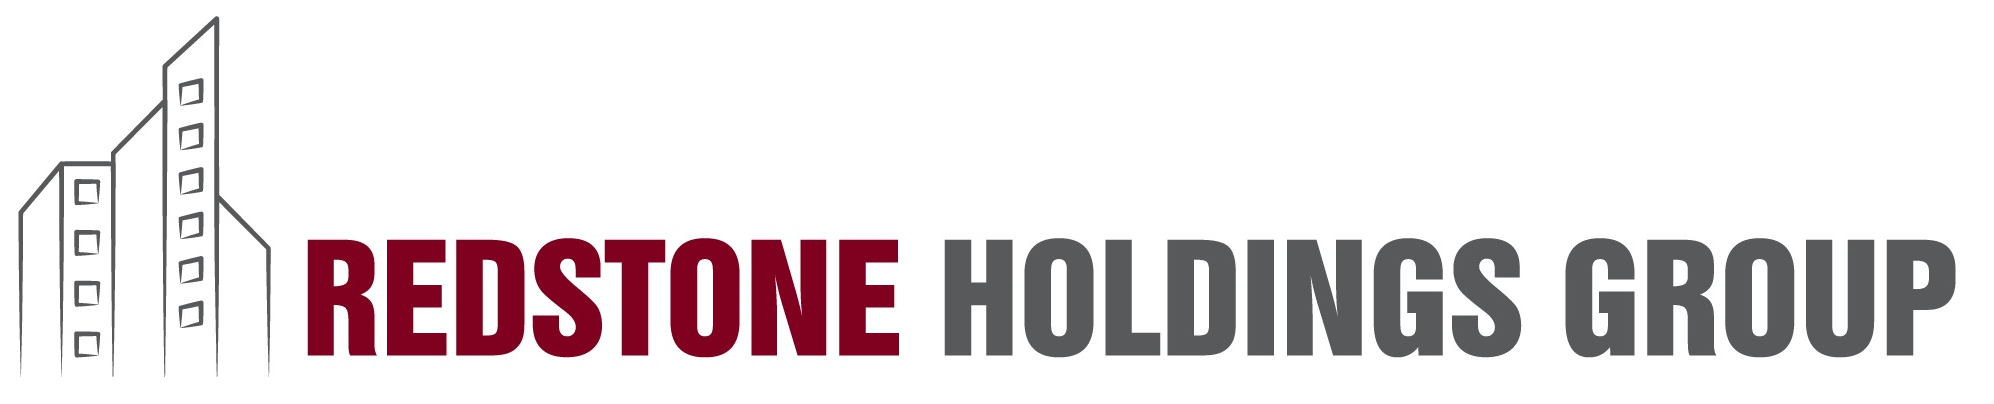 redstone holding group